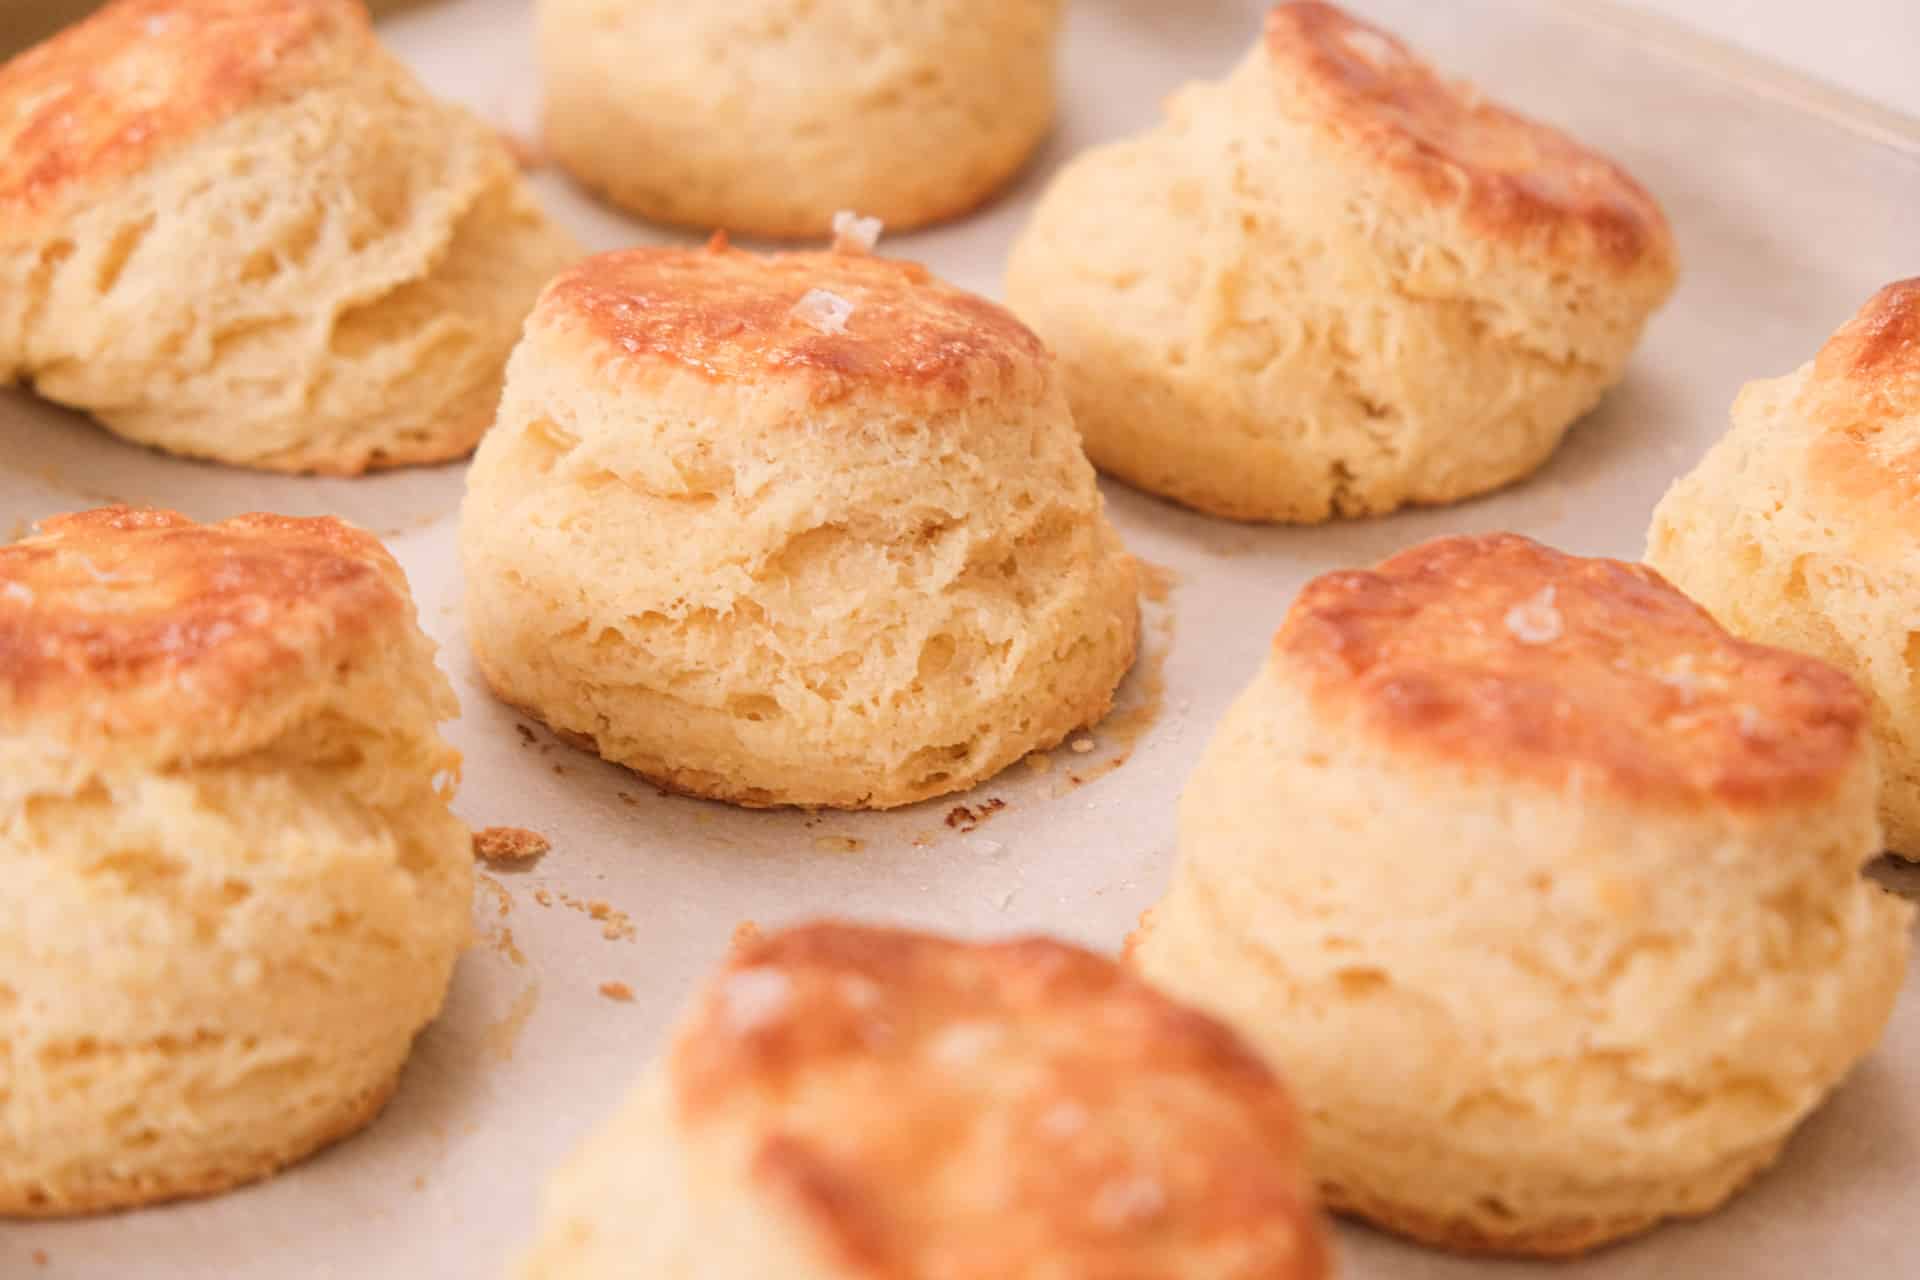 A bunch of buttermilk biscuits on a baking tray